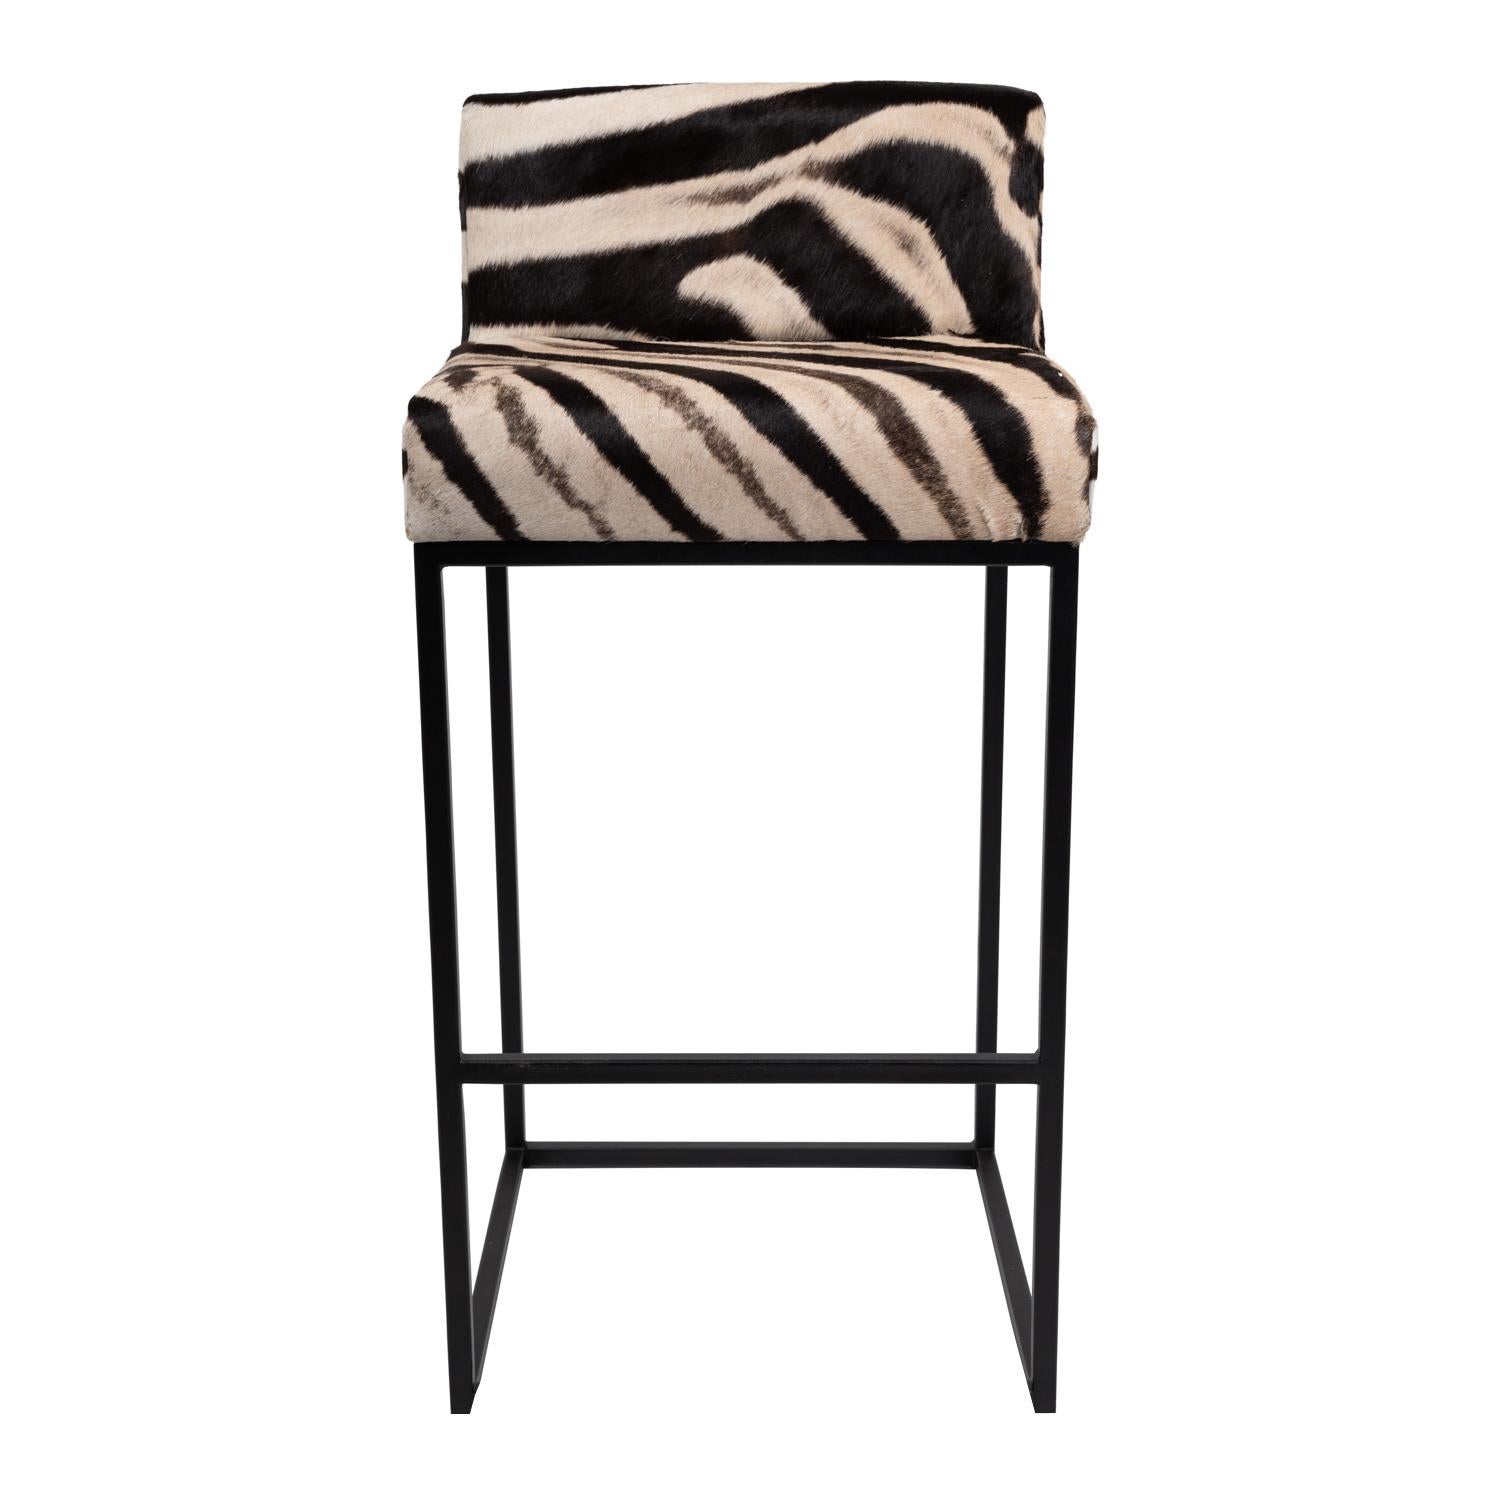 Genuine Burchell Zebra hide and classic black steel combine together to make the stunning Zebra Hide Bar Stool! Whether used for lounging, dining, or working, this bar stool provides a gorgeous yet comfortable seat sure to draw attention to any